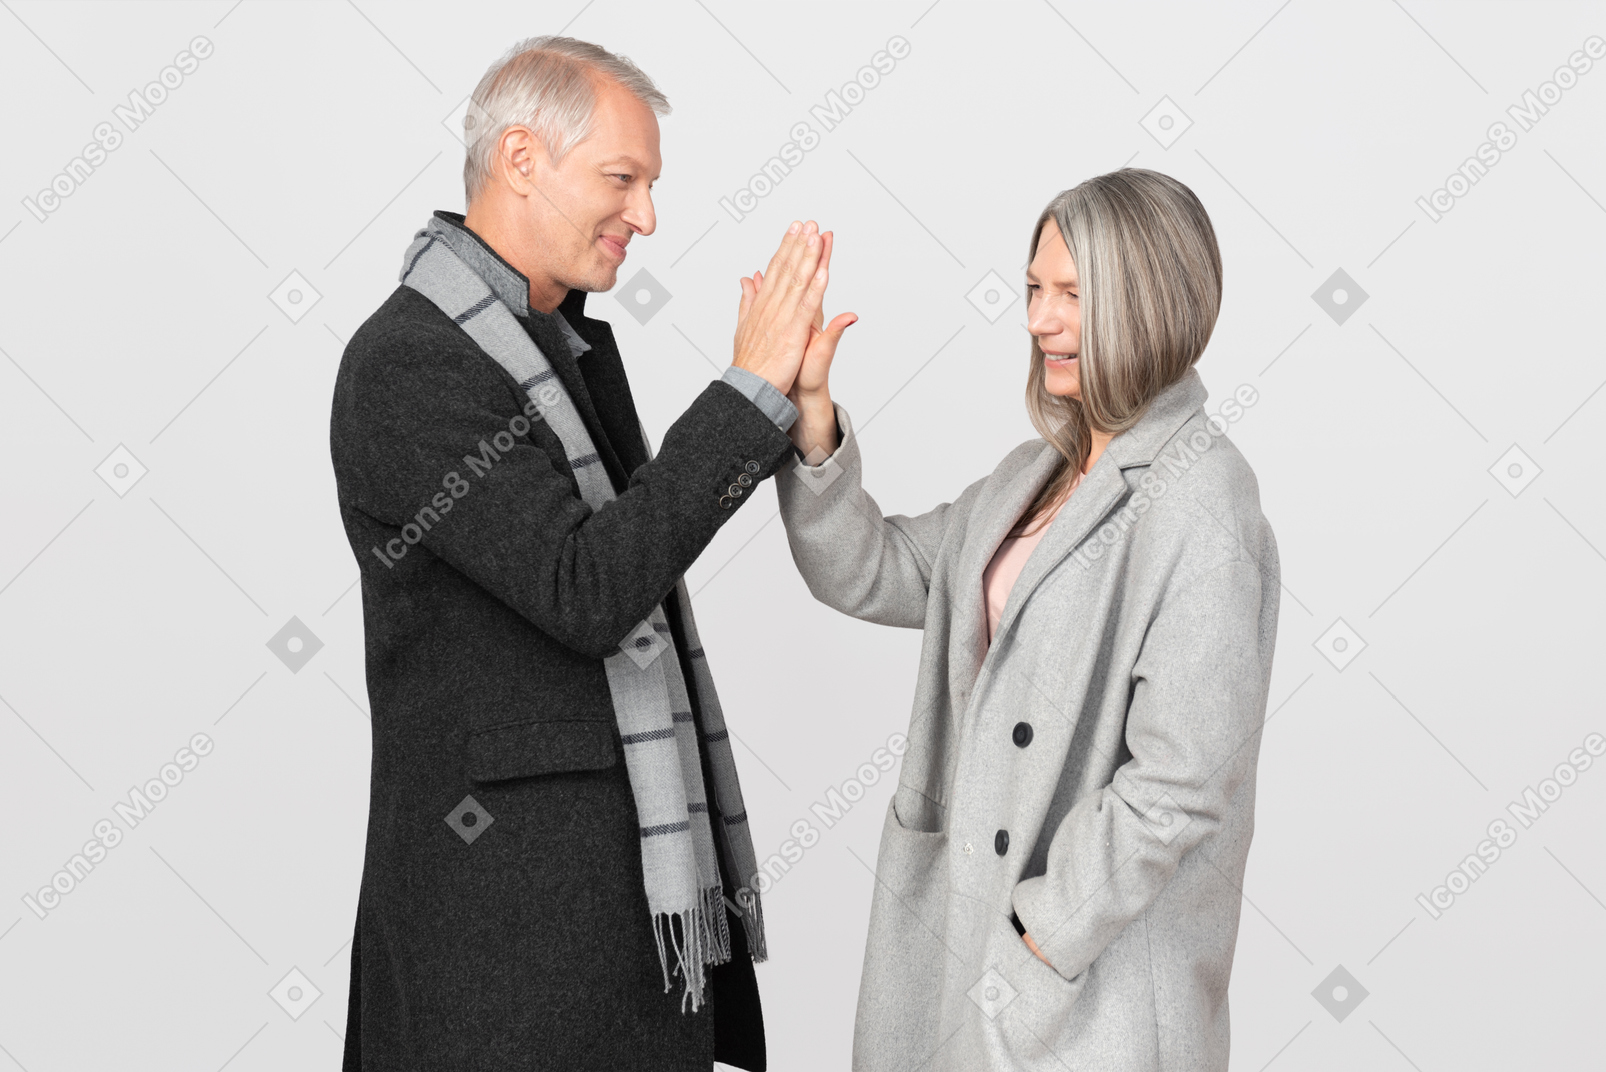 Man and woman making high five